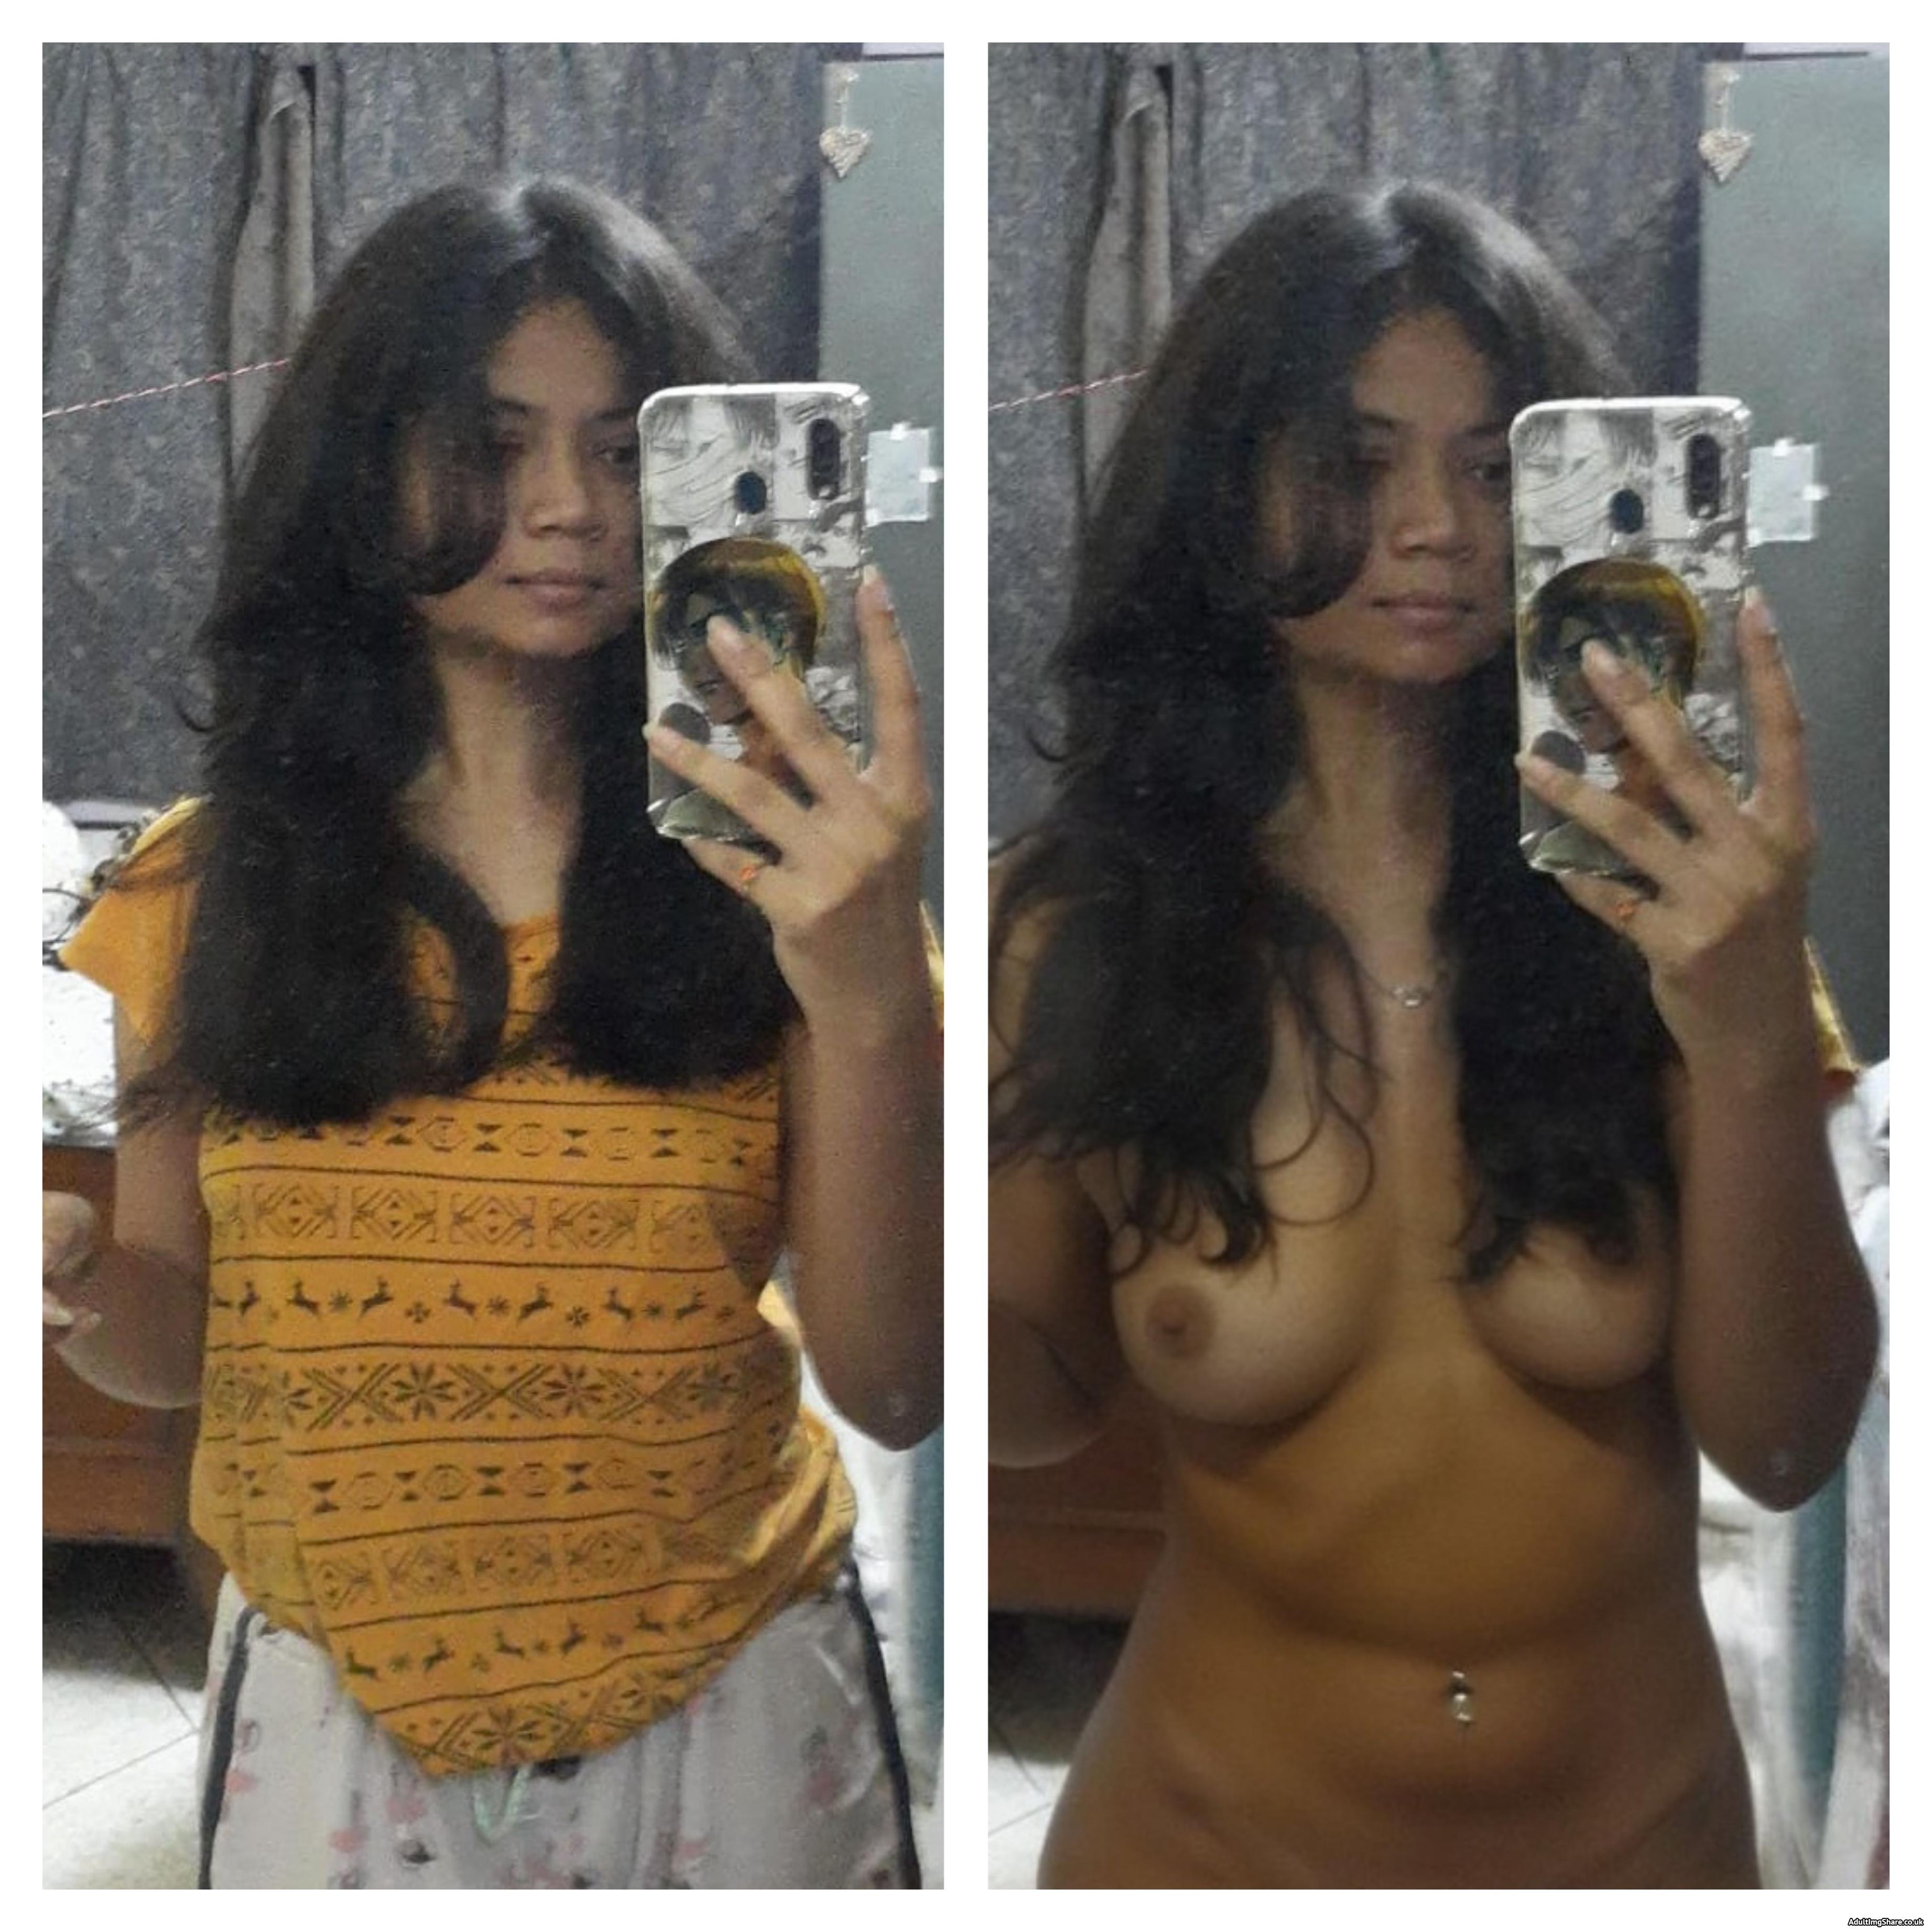 Adult nude selfies and pics